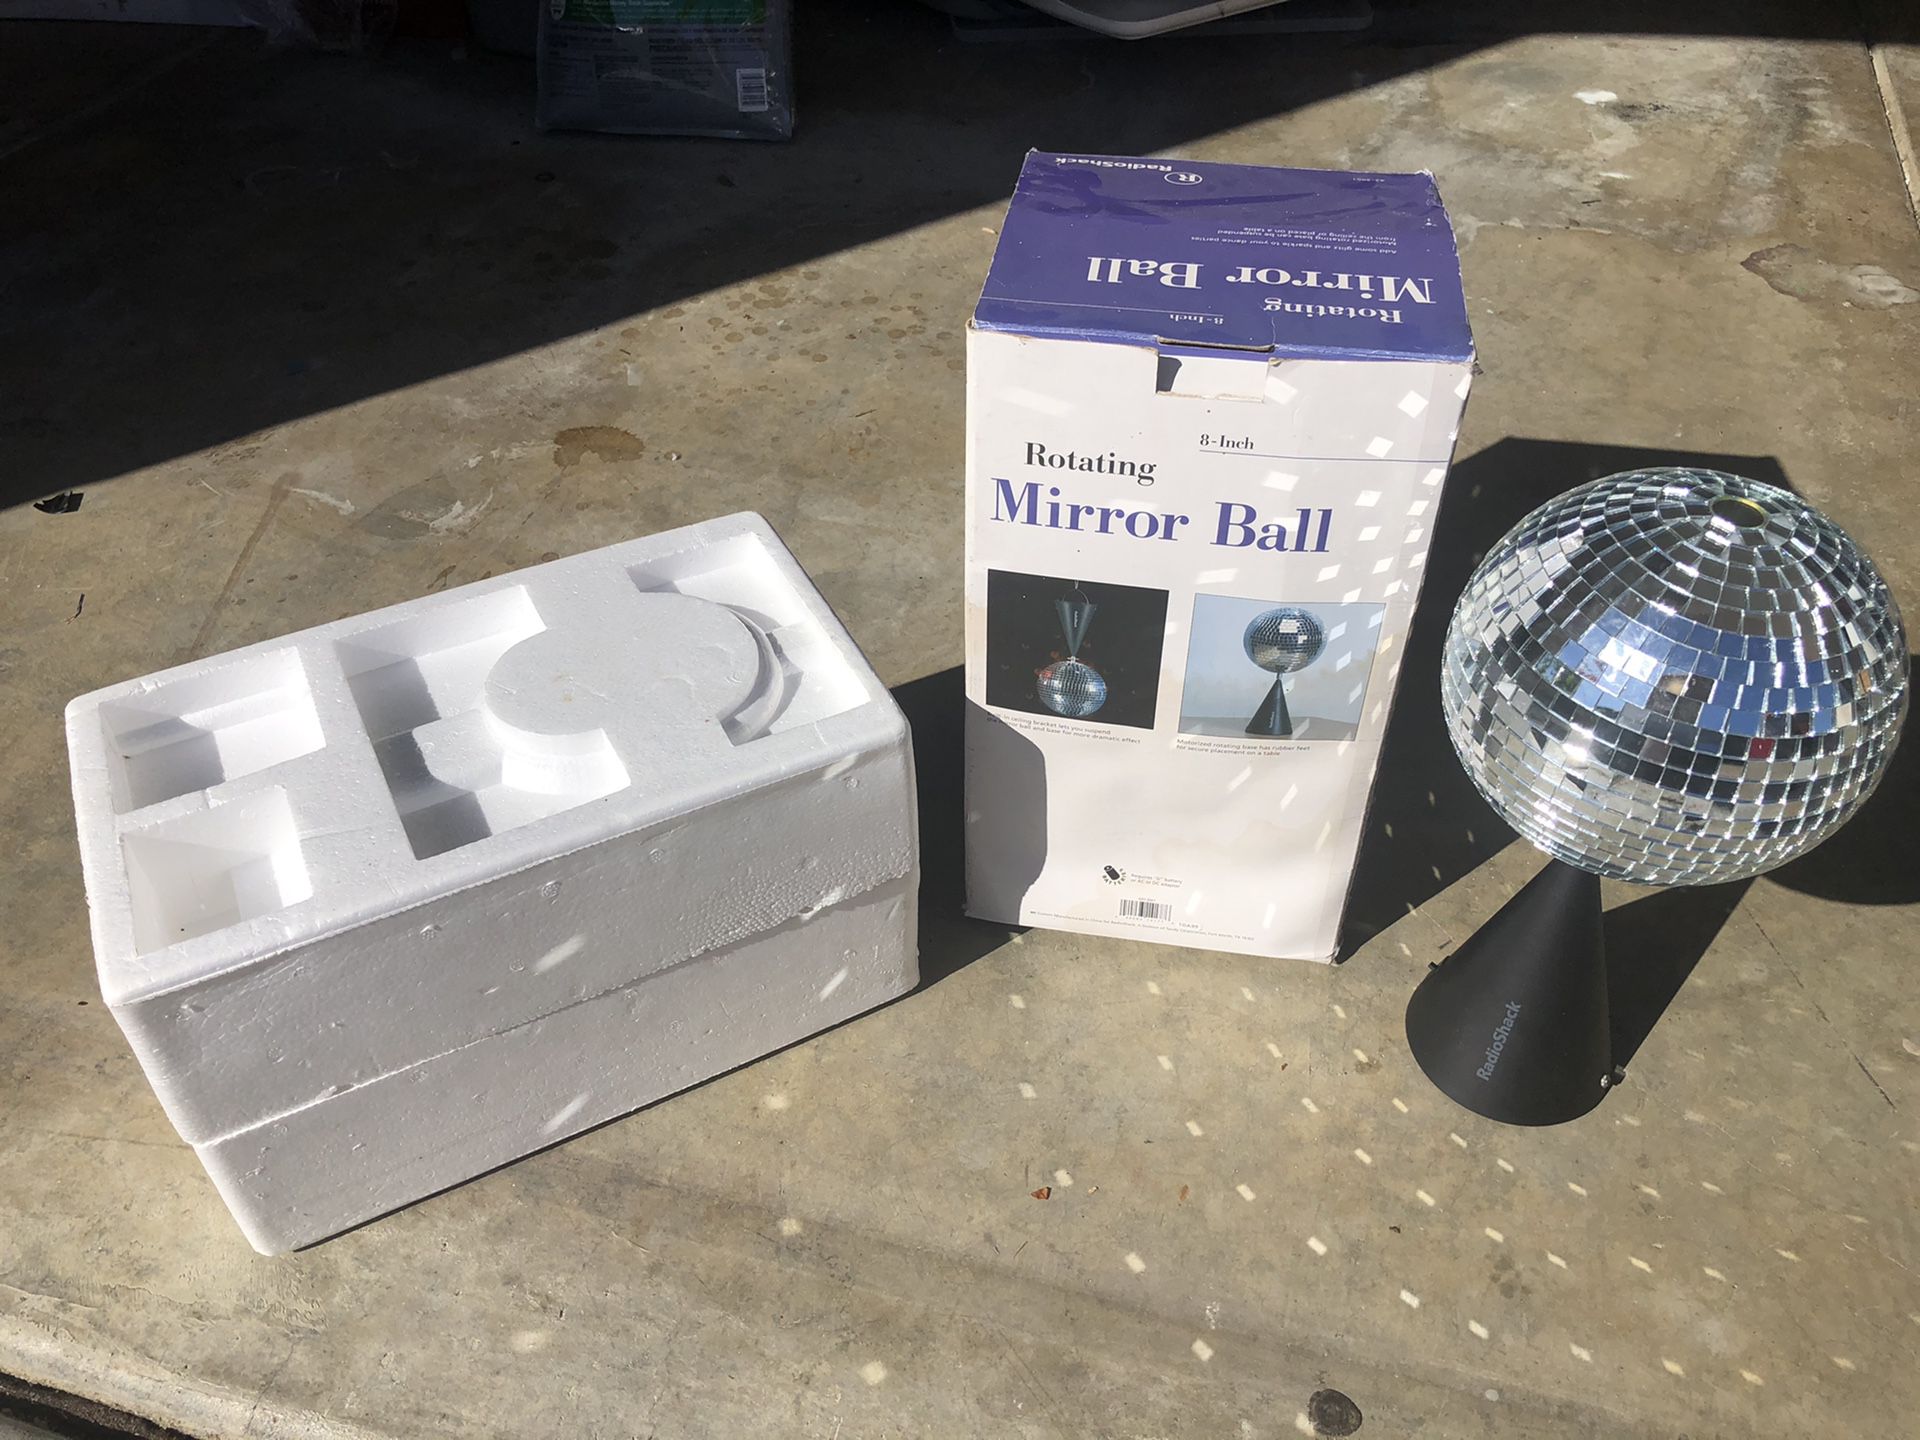 Rotating mirror ball, perfect shape. In original box with styrofoam clam shell for storage, perfect condition